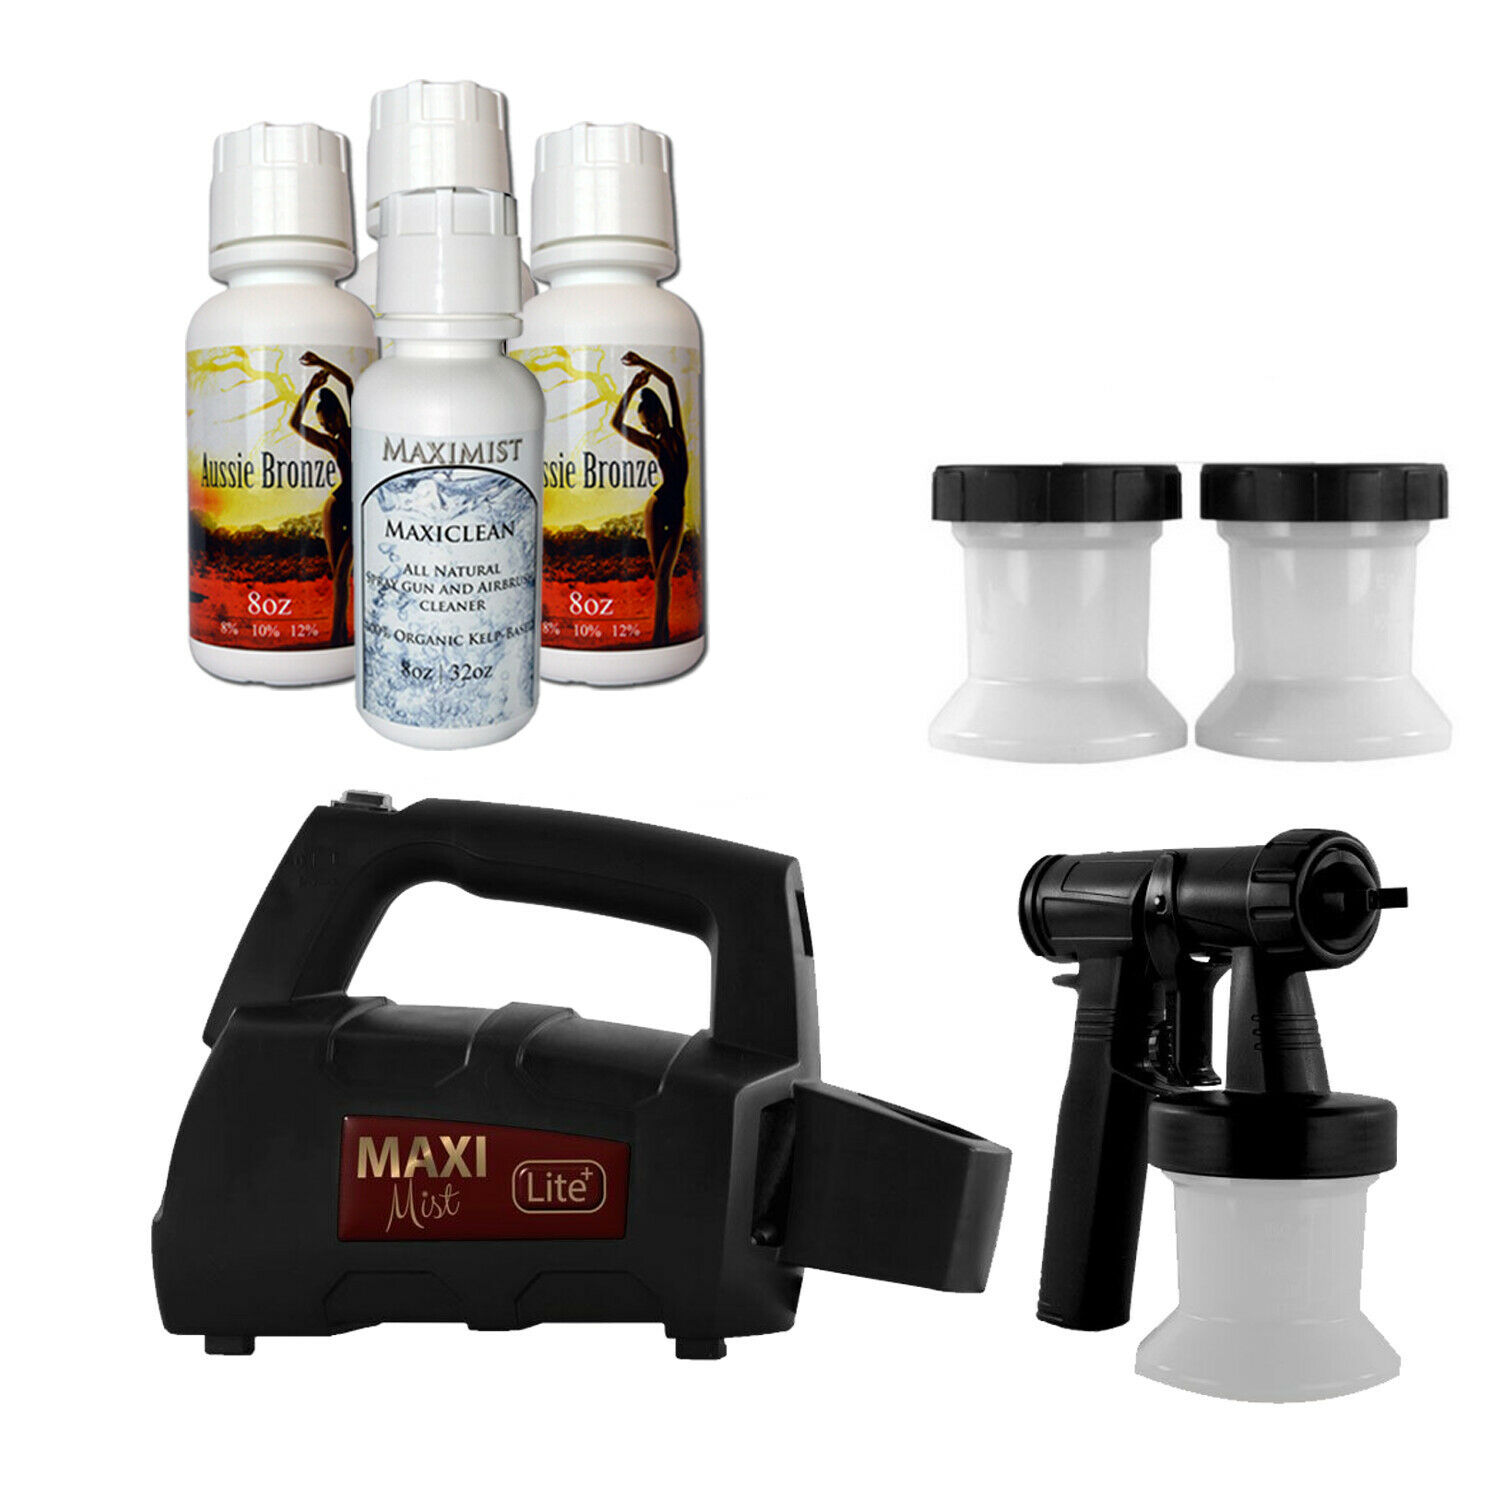 Maximist Lite Plus Sunless machine with Tampa Bay Tan Solution and Gun Cleaner